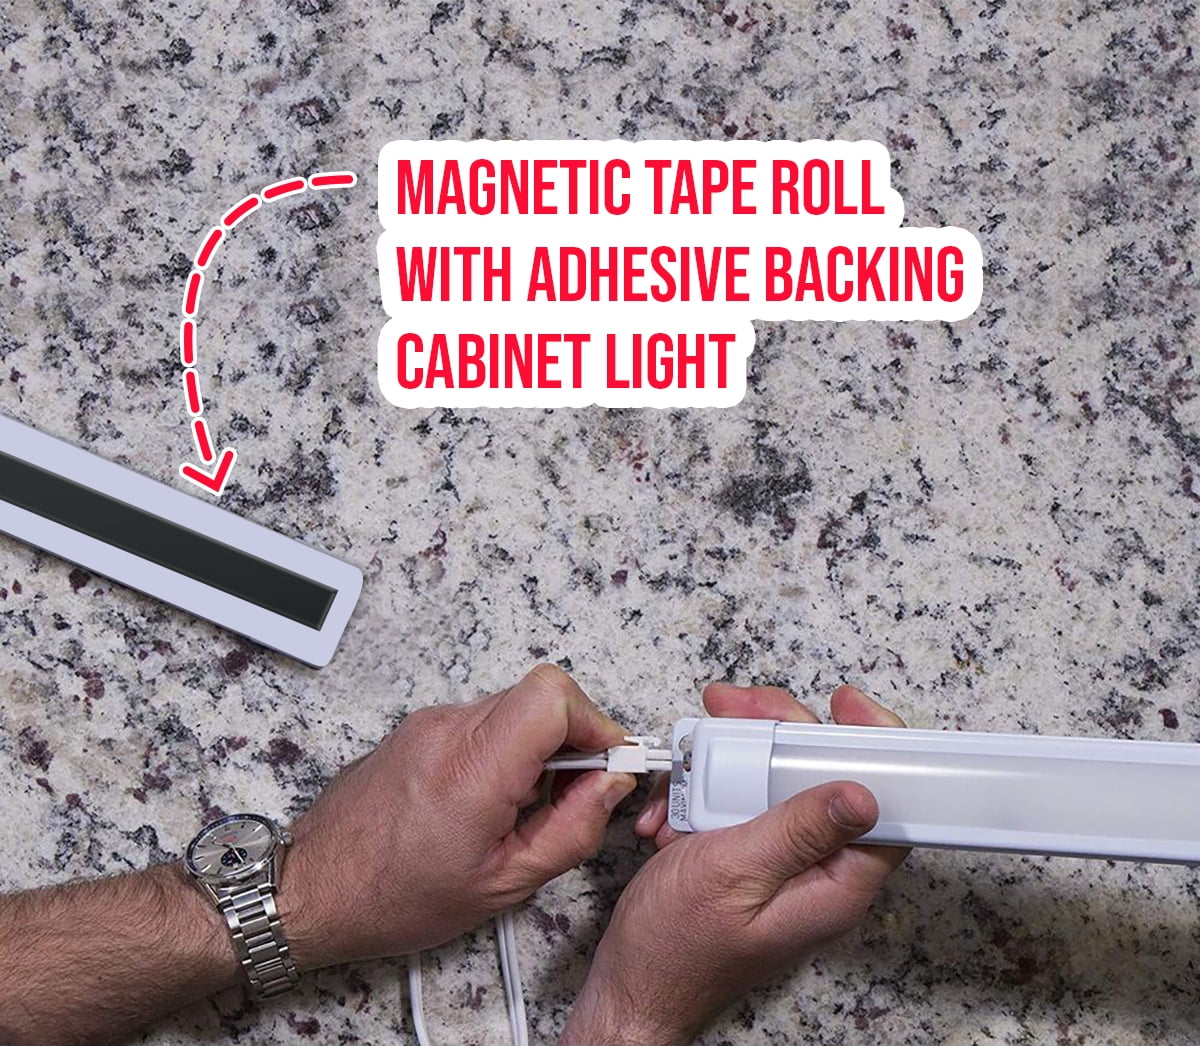 Magnetic Tape Roll with Adhesive Backing - Strip of Peel and Stick Magnets  - Super Strong & Sticky by Flexible Magnets (120 mil x 0.5 inch x 100 feet)  